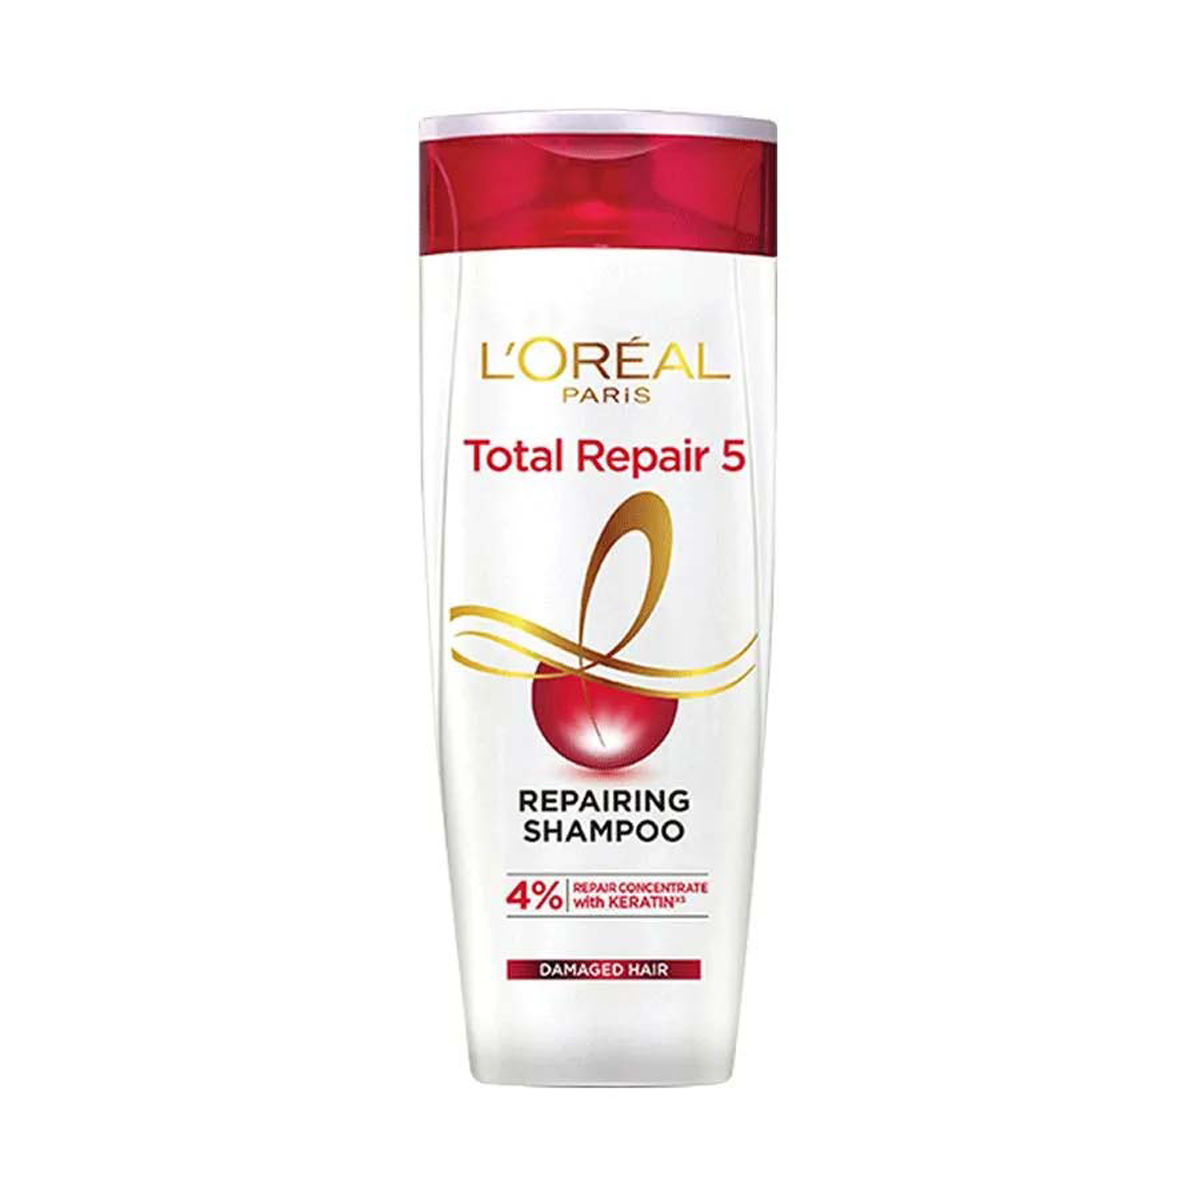 LOreal Paris Total Repair 5 Shampoo and Conditioner Review Price   Vanitynoapologies  Indian Makeup and Beauty Blog